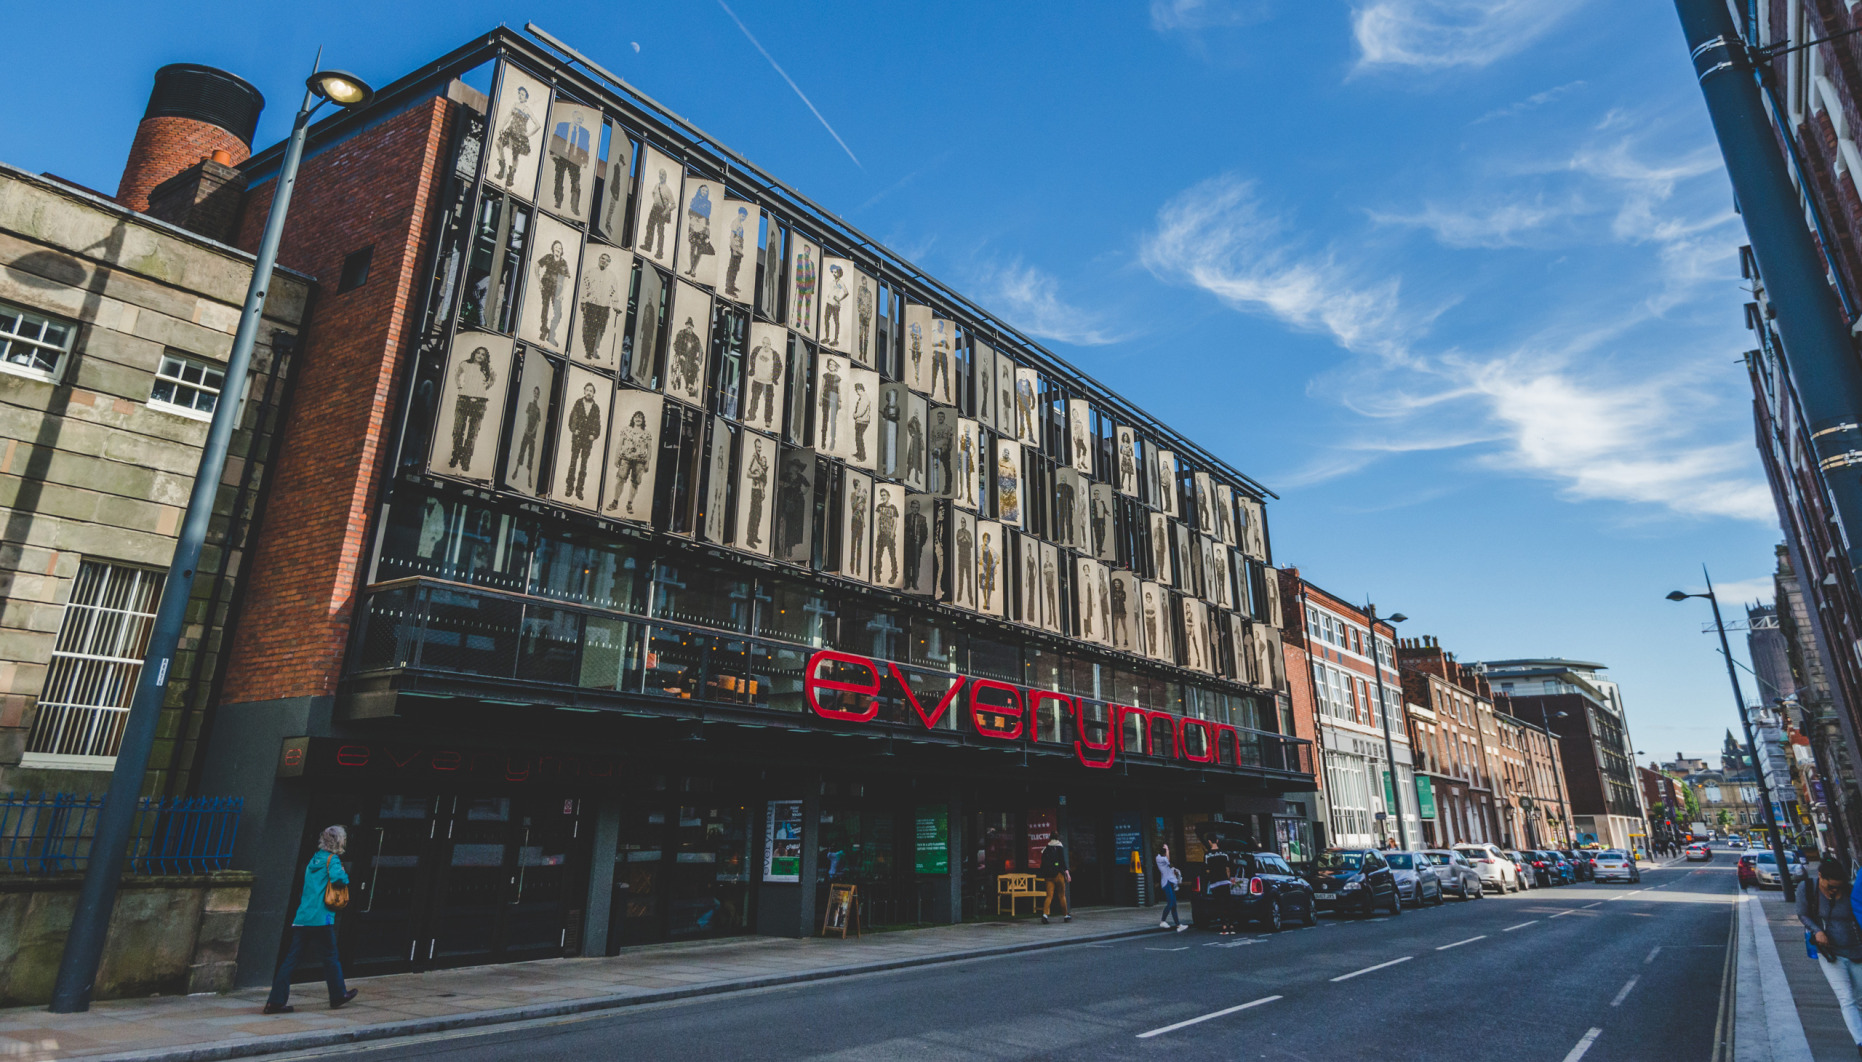 Liverpool Everyman accessible theatre street view